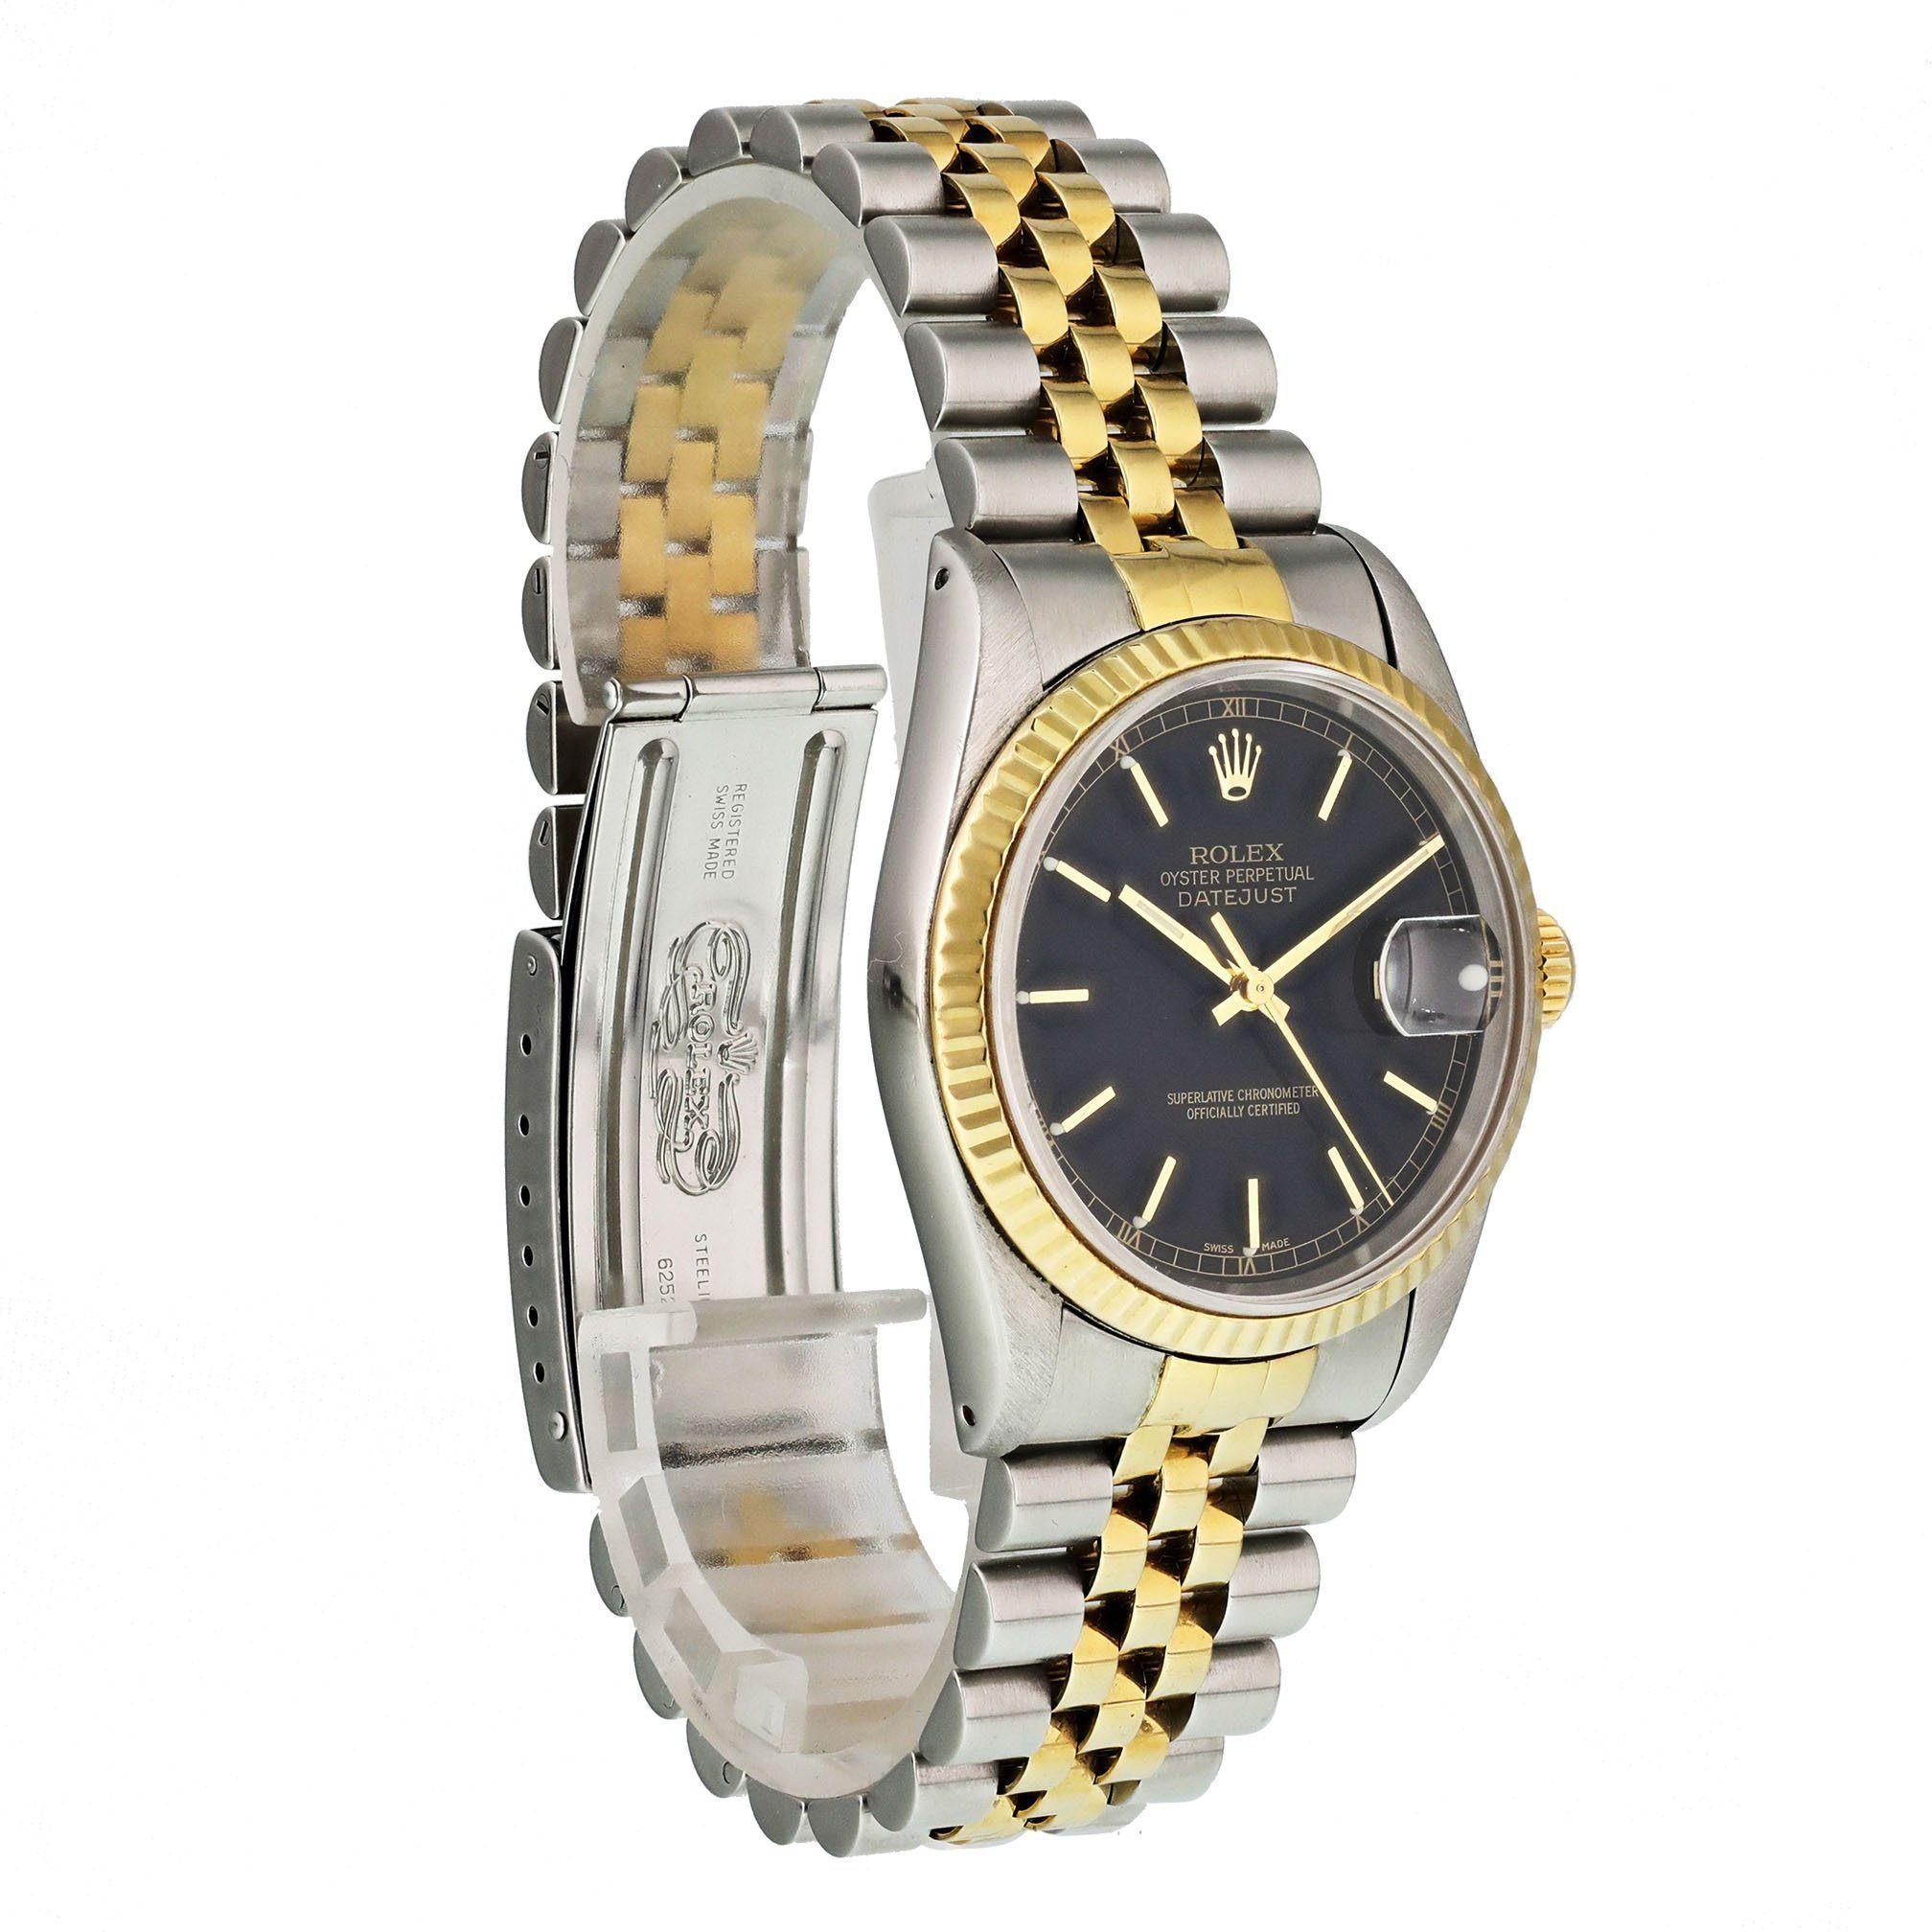 Rolex Datejust 16233 Men's Watch In Excellent Condition For Sale In New York, NY